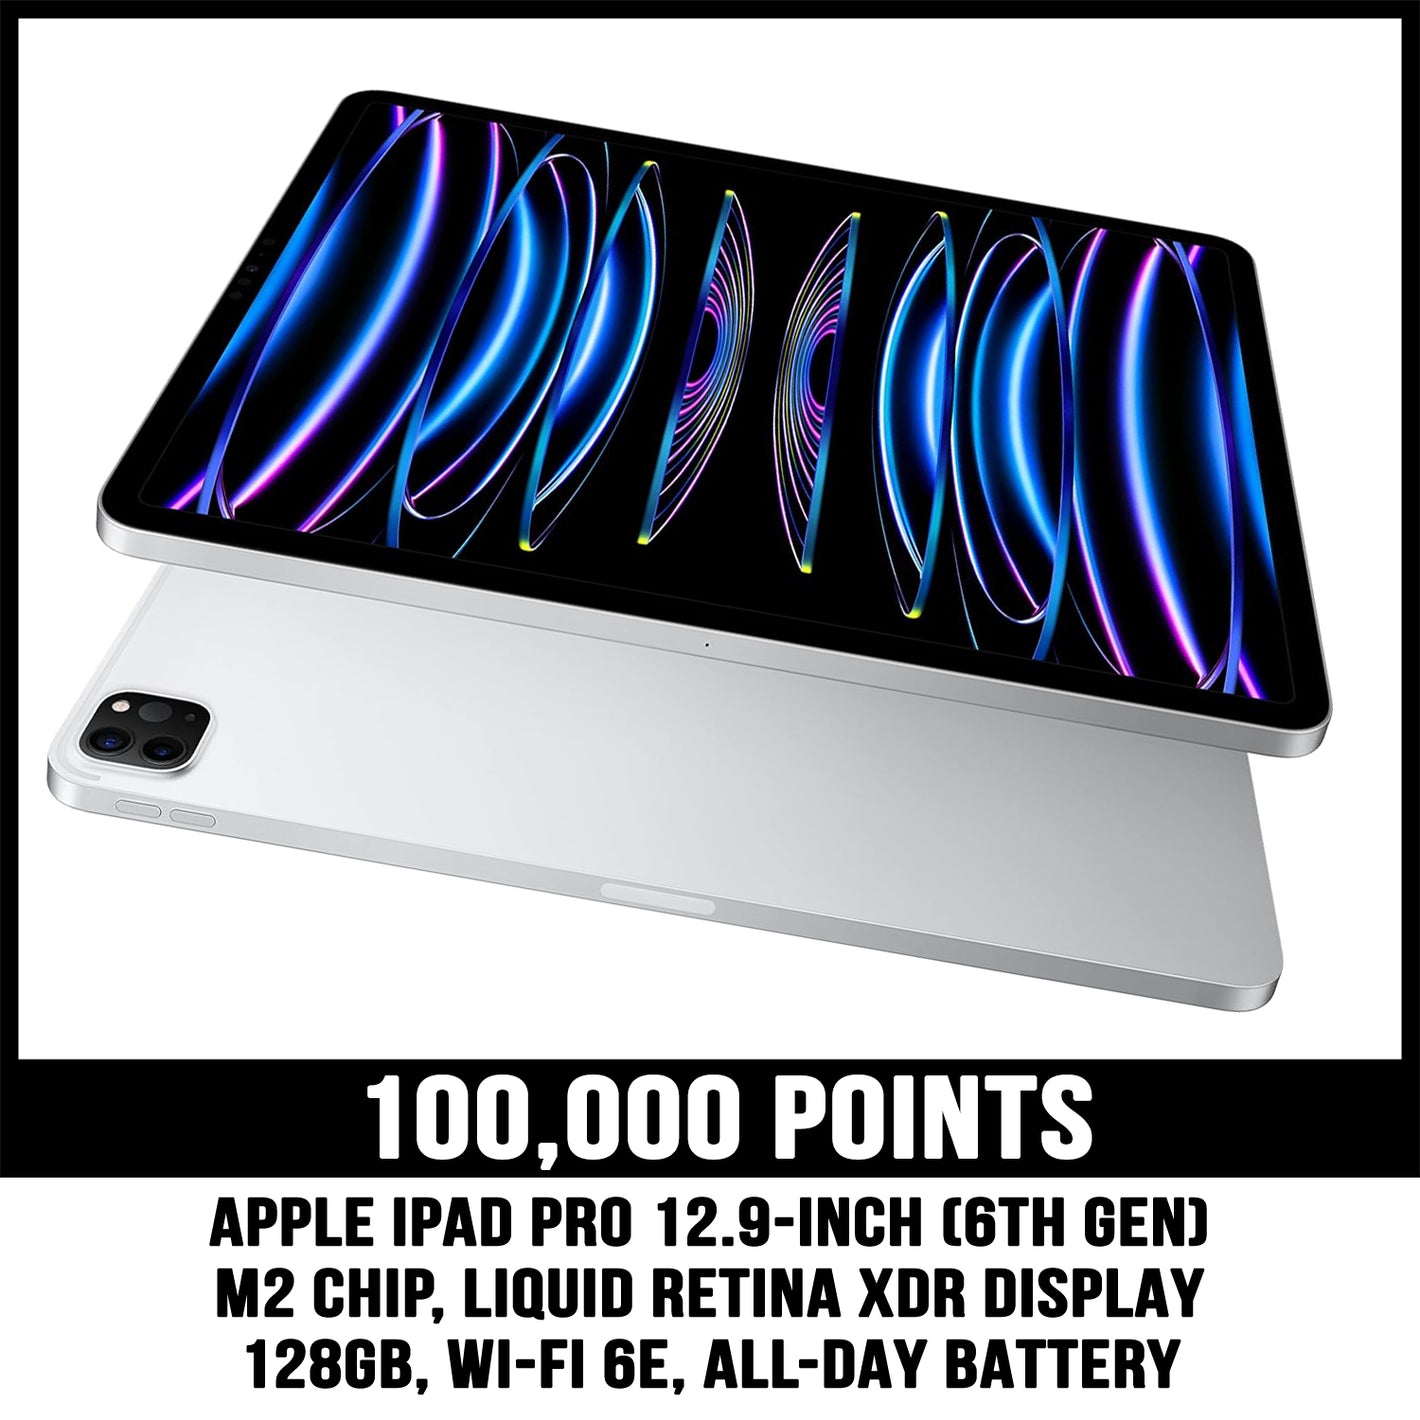 Apple iPad Pro sixth generation prize for 100000 points